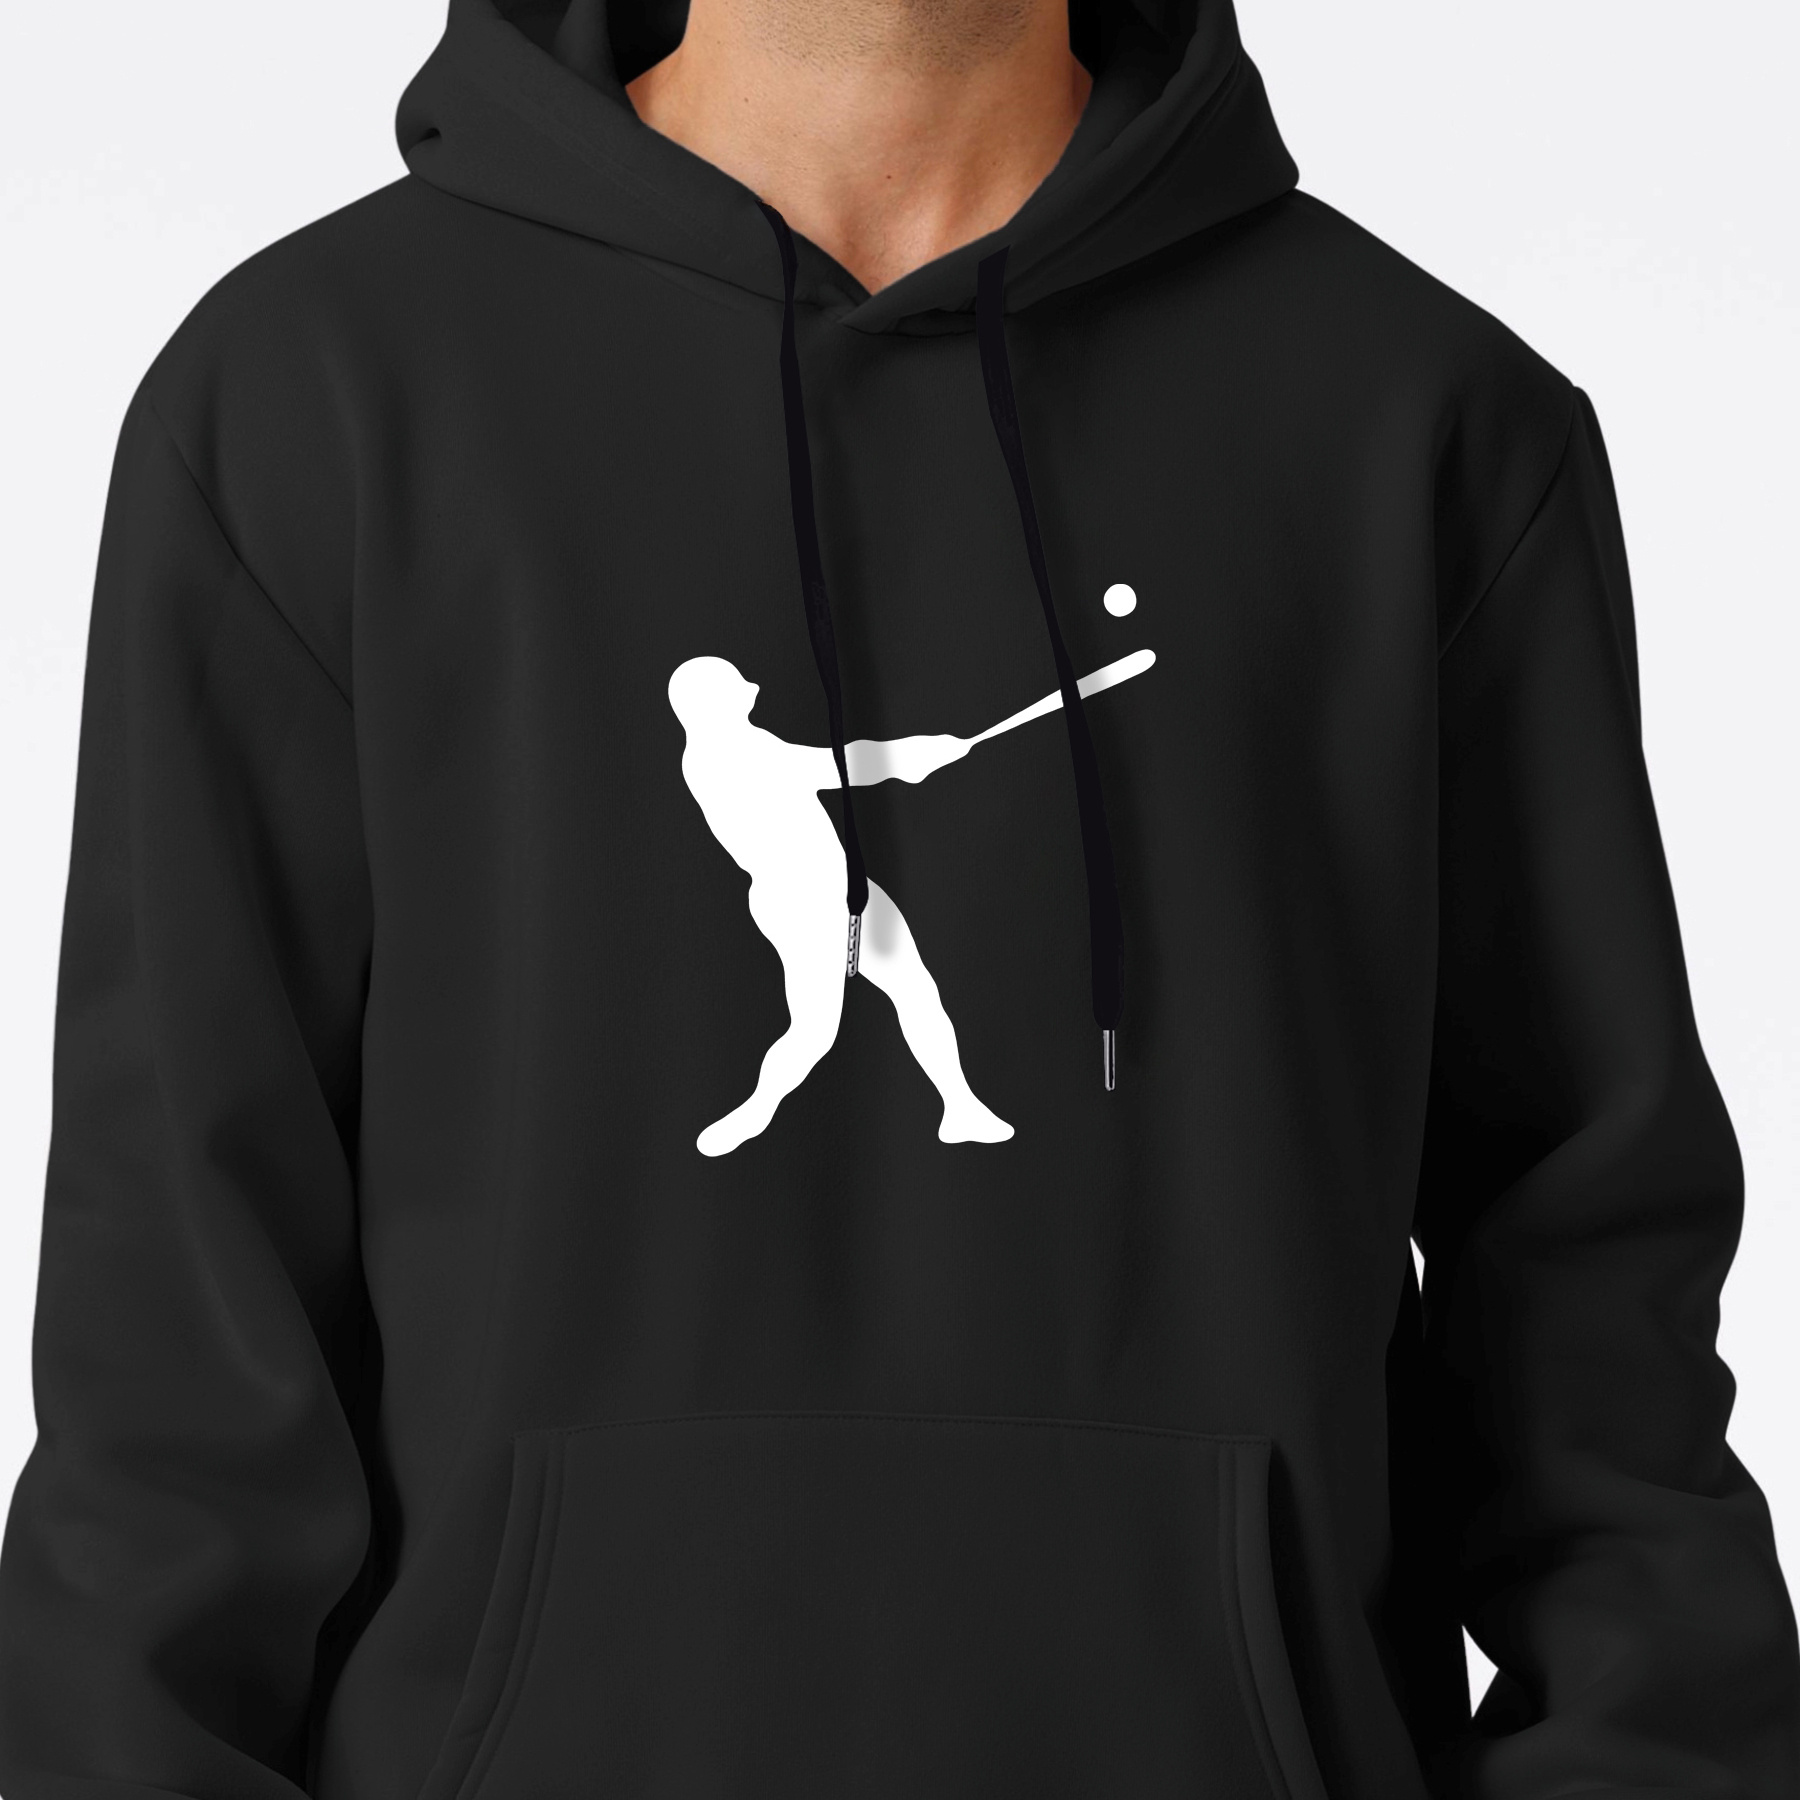 

Baseball Player Print Sweatshirt, Men's Fleece Long Sleeve Hoodies Street Casual Sports And Fashionable With Kangaroo Pocket, For Outdoor Sports, For Autumn Winter, Warm And Cozy